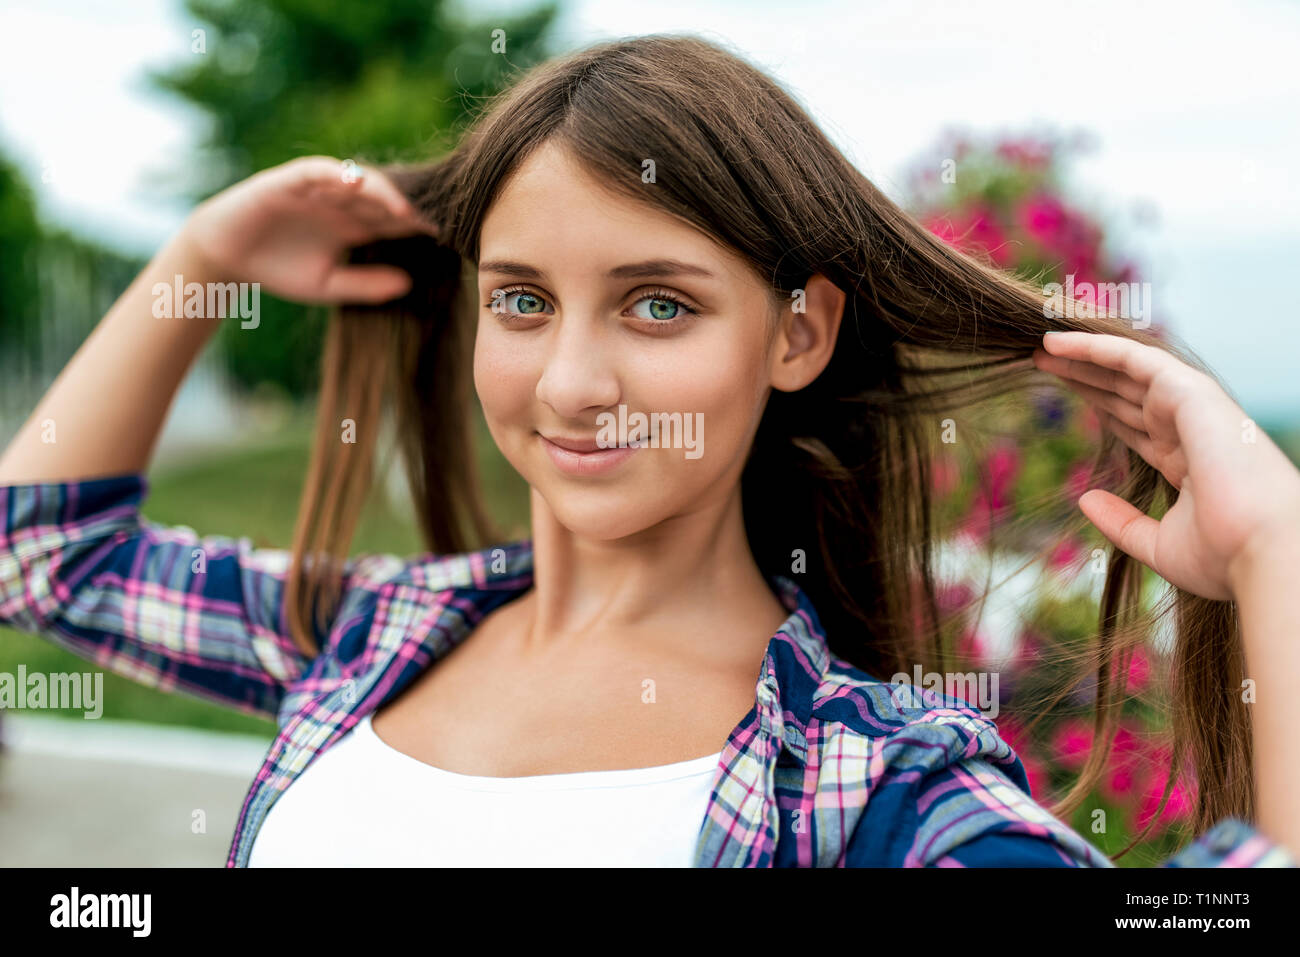 Beautiful Girl Student 13 16 Years Old In The Summer In The Park In The Fresh Air Straightens Long Hair Happy Smiles Close Up Shirt Shirt Flowers Stock Photo Alamy